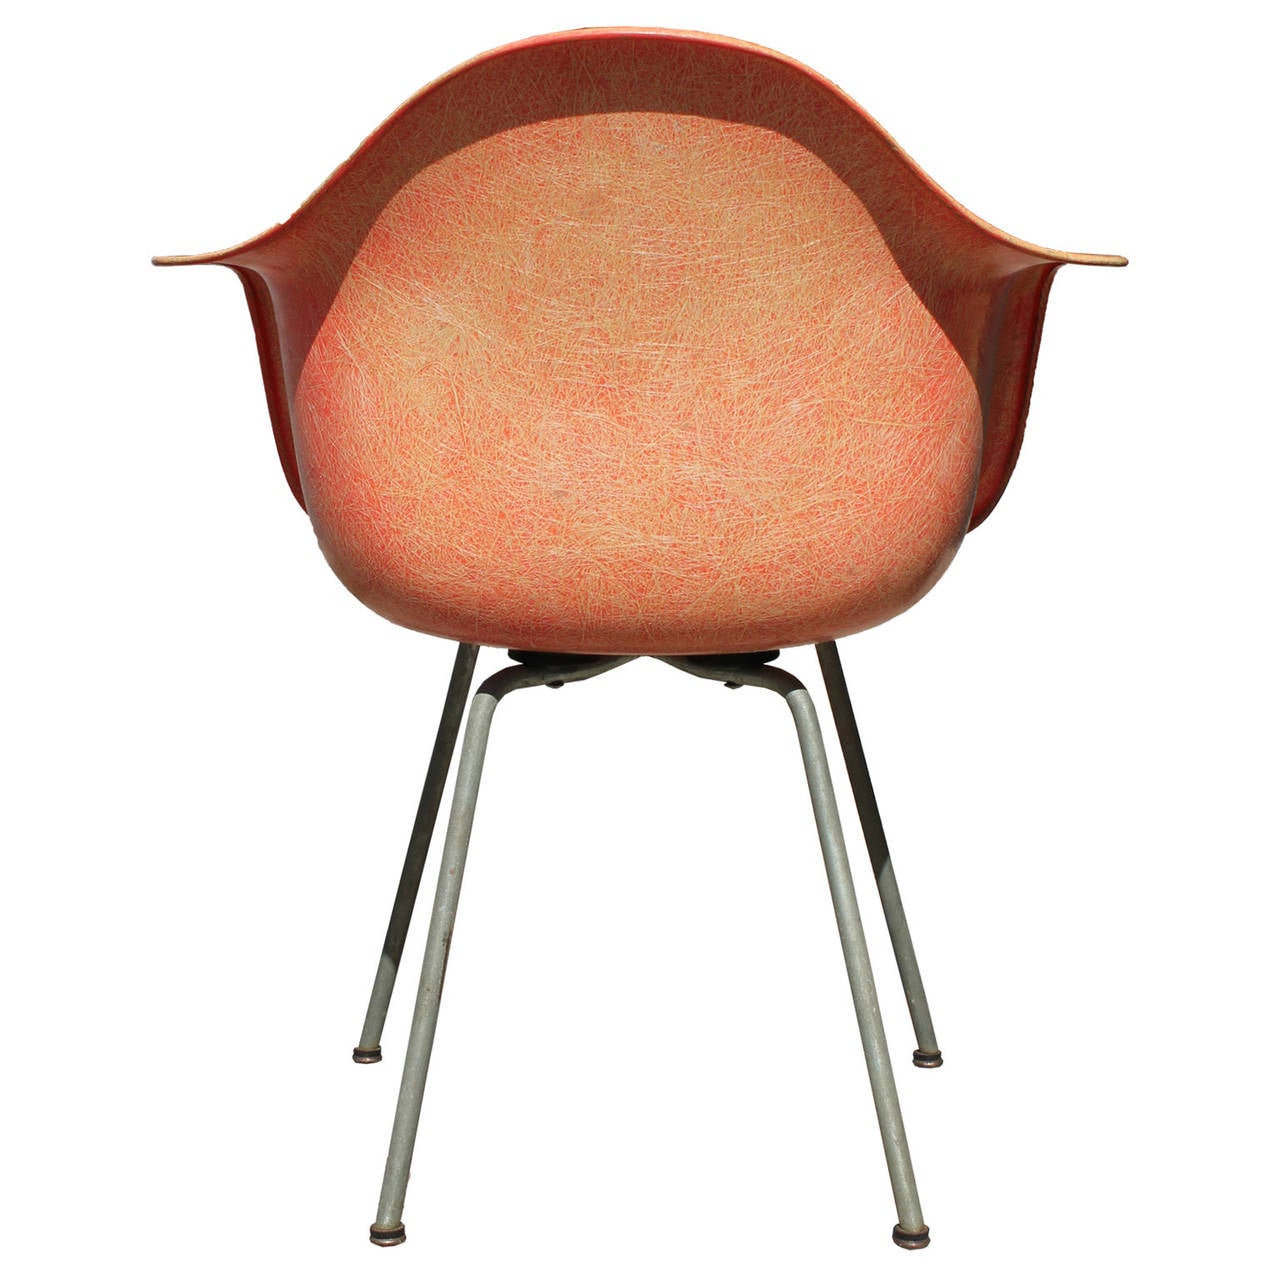 American Early Eames Roped Edge Salmon Shell Chair Zenith